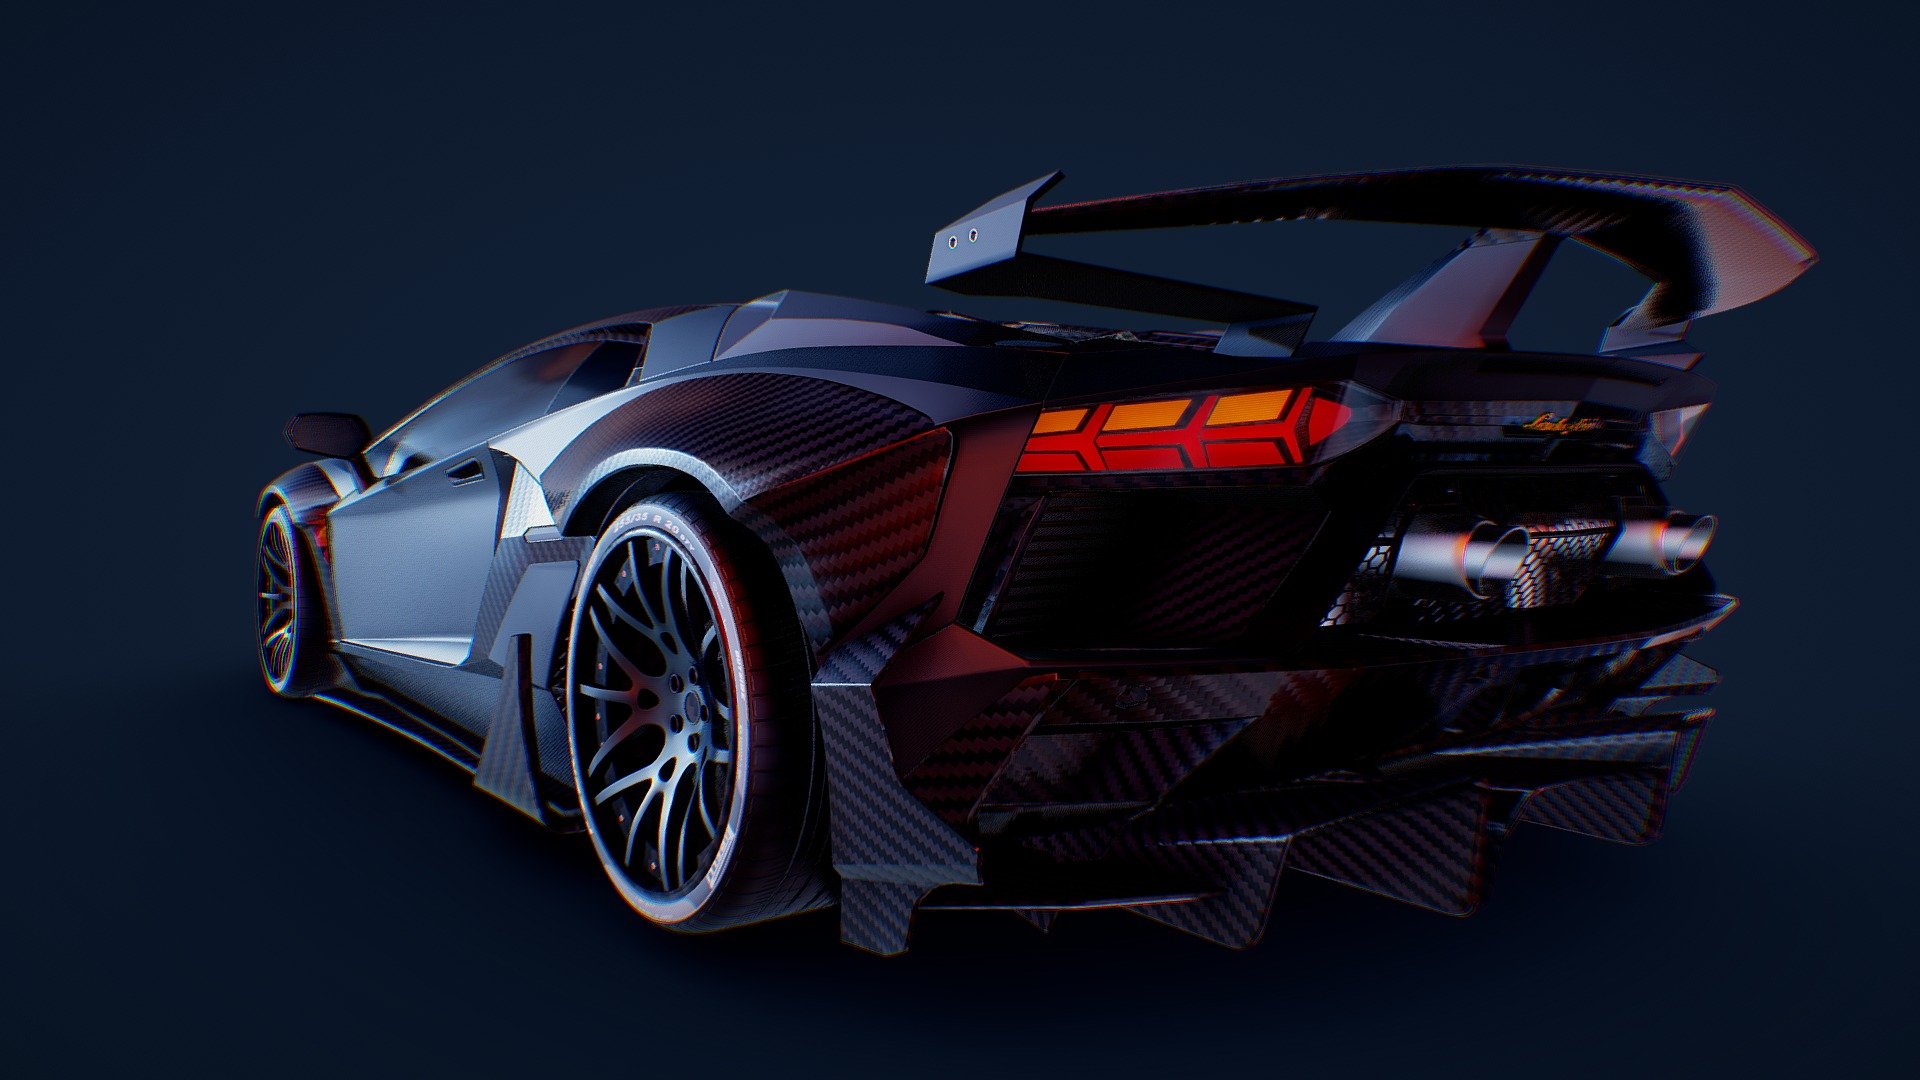 Credit to the model author:  https://sketchfab.com/3Duae

This Model:
https://sketchfab.com/3d-models/aventador-svj-black-ghosttm-412e5ba4c1264a4fab97660ebc0695a4 
Had wrong normals, a mishmash of tris and quads, a mishmash of english and french, unsemetric crippled verts and dozens of unused and duplicate materials and textures. 

I tried to clean it up a little and applied some better textures with normals. ^^
Props to the author of this model! The body of the car is very well made 3d model